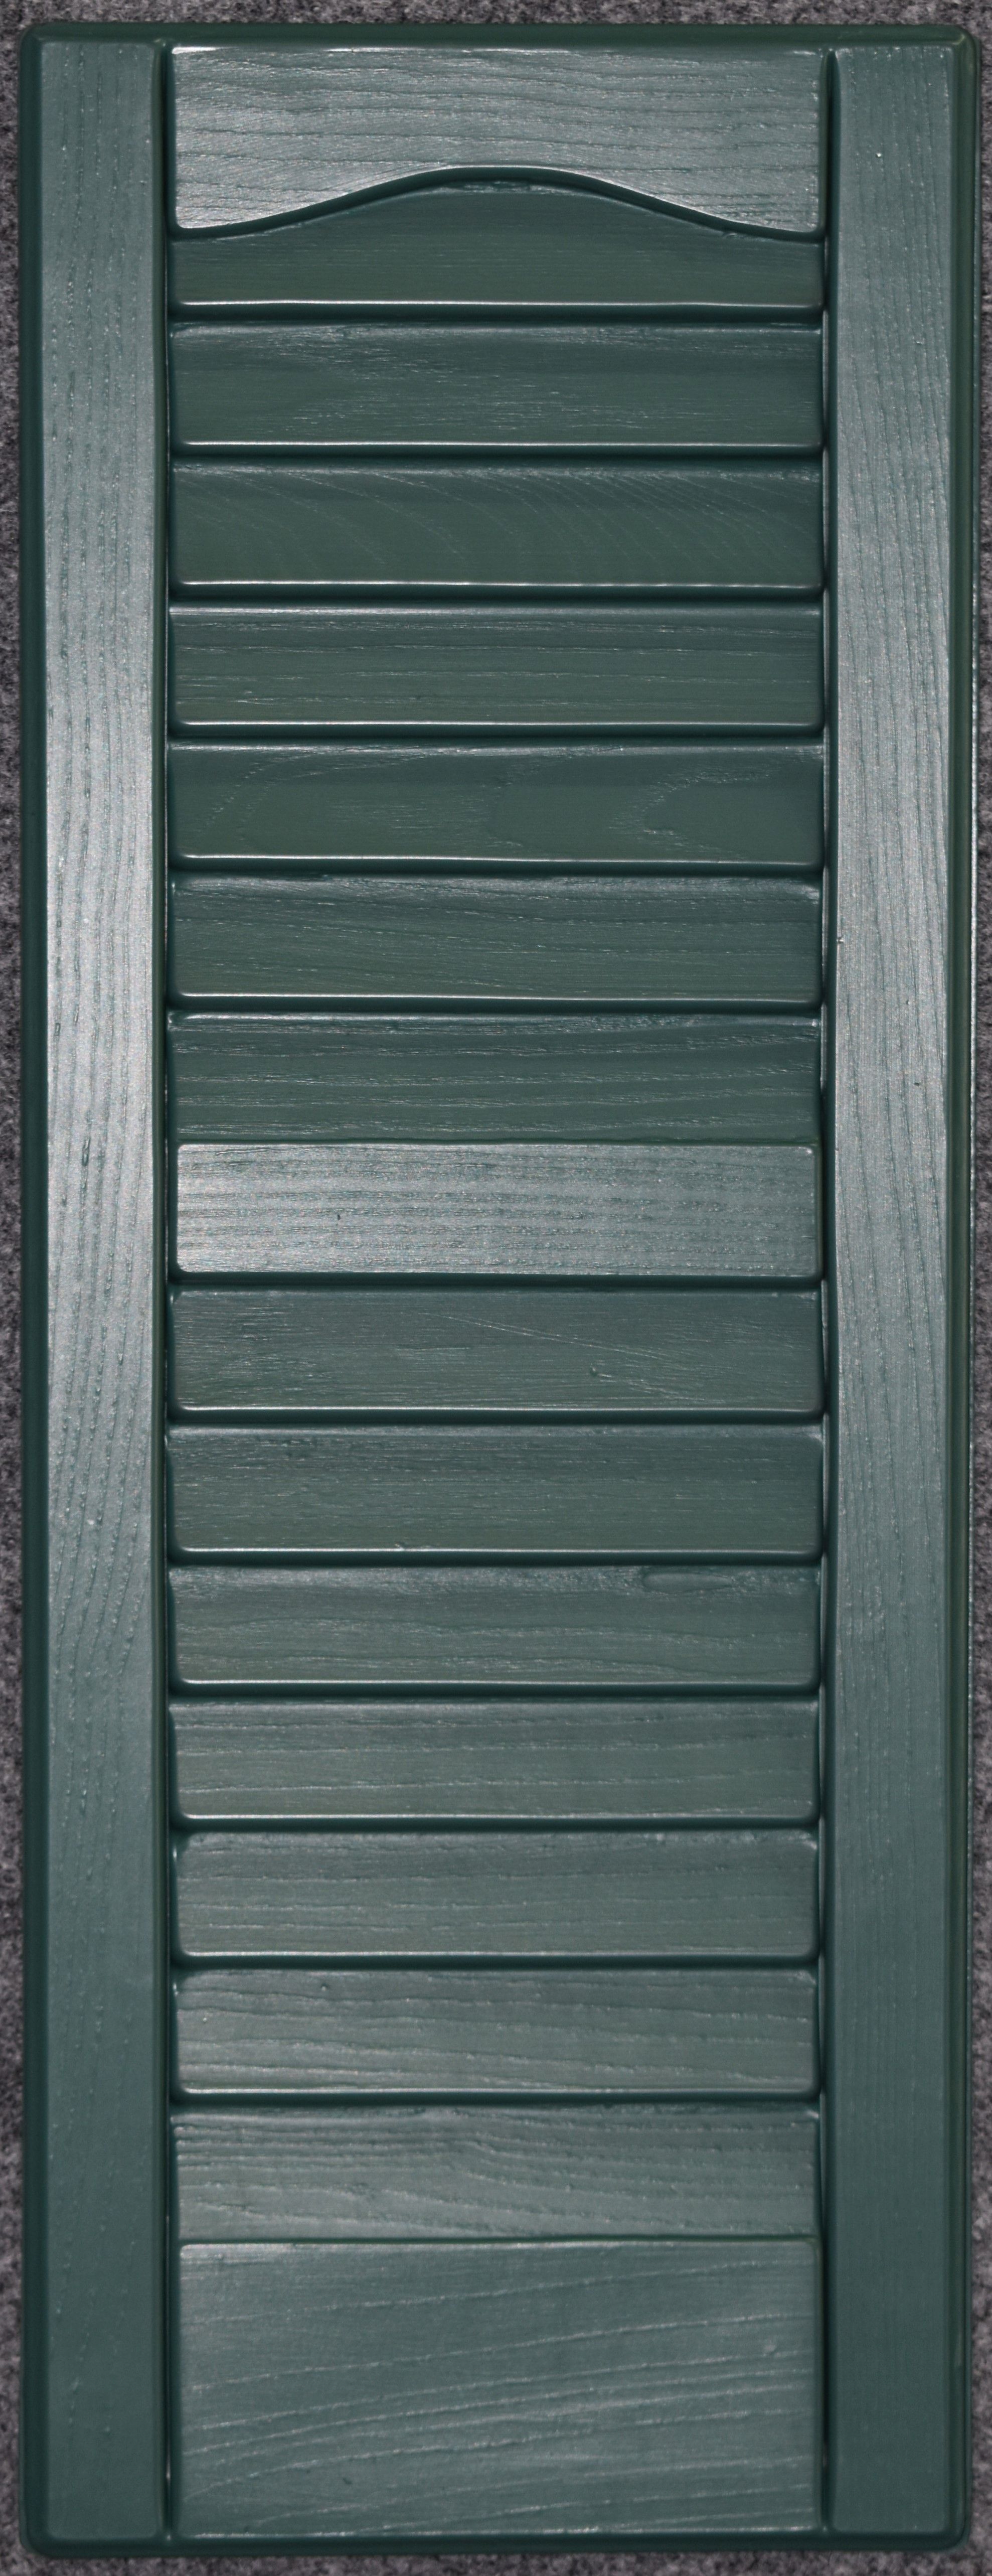 L1255gn-fh 12 X 55 In. Louvered Exterior Decorative Shutters, Hunter Green